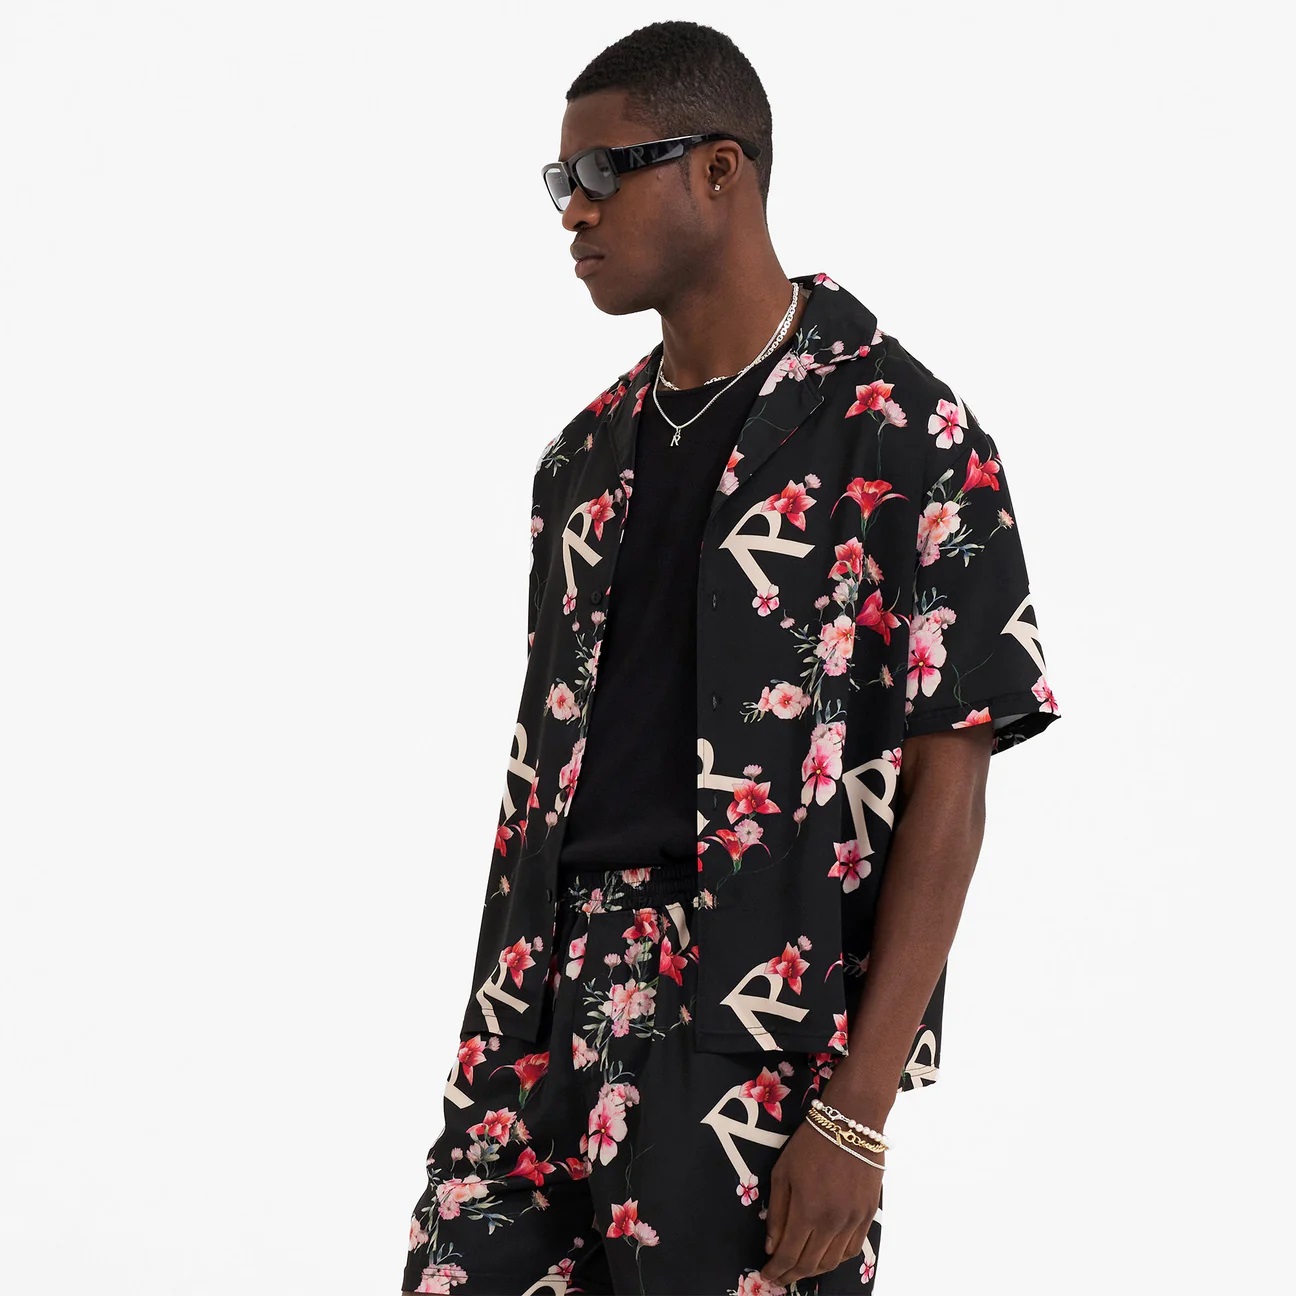 REPRESENT Floral Shirt in Black S